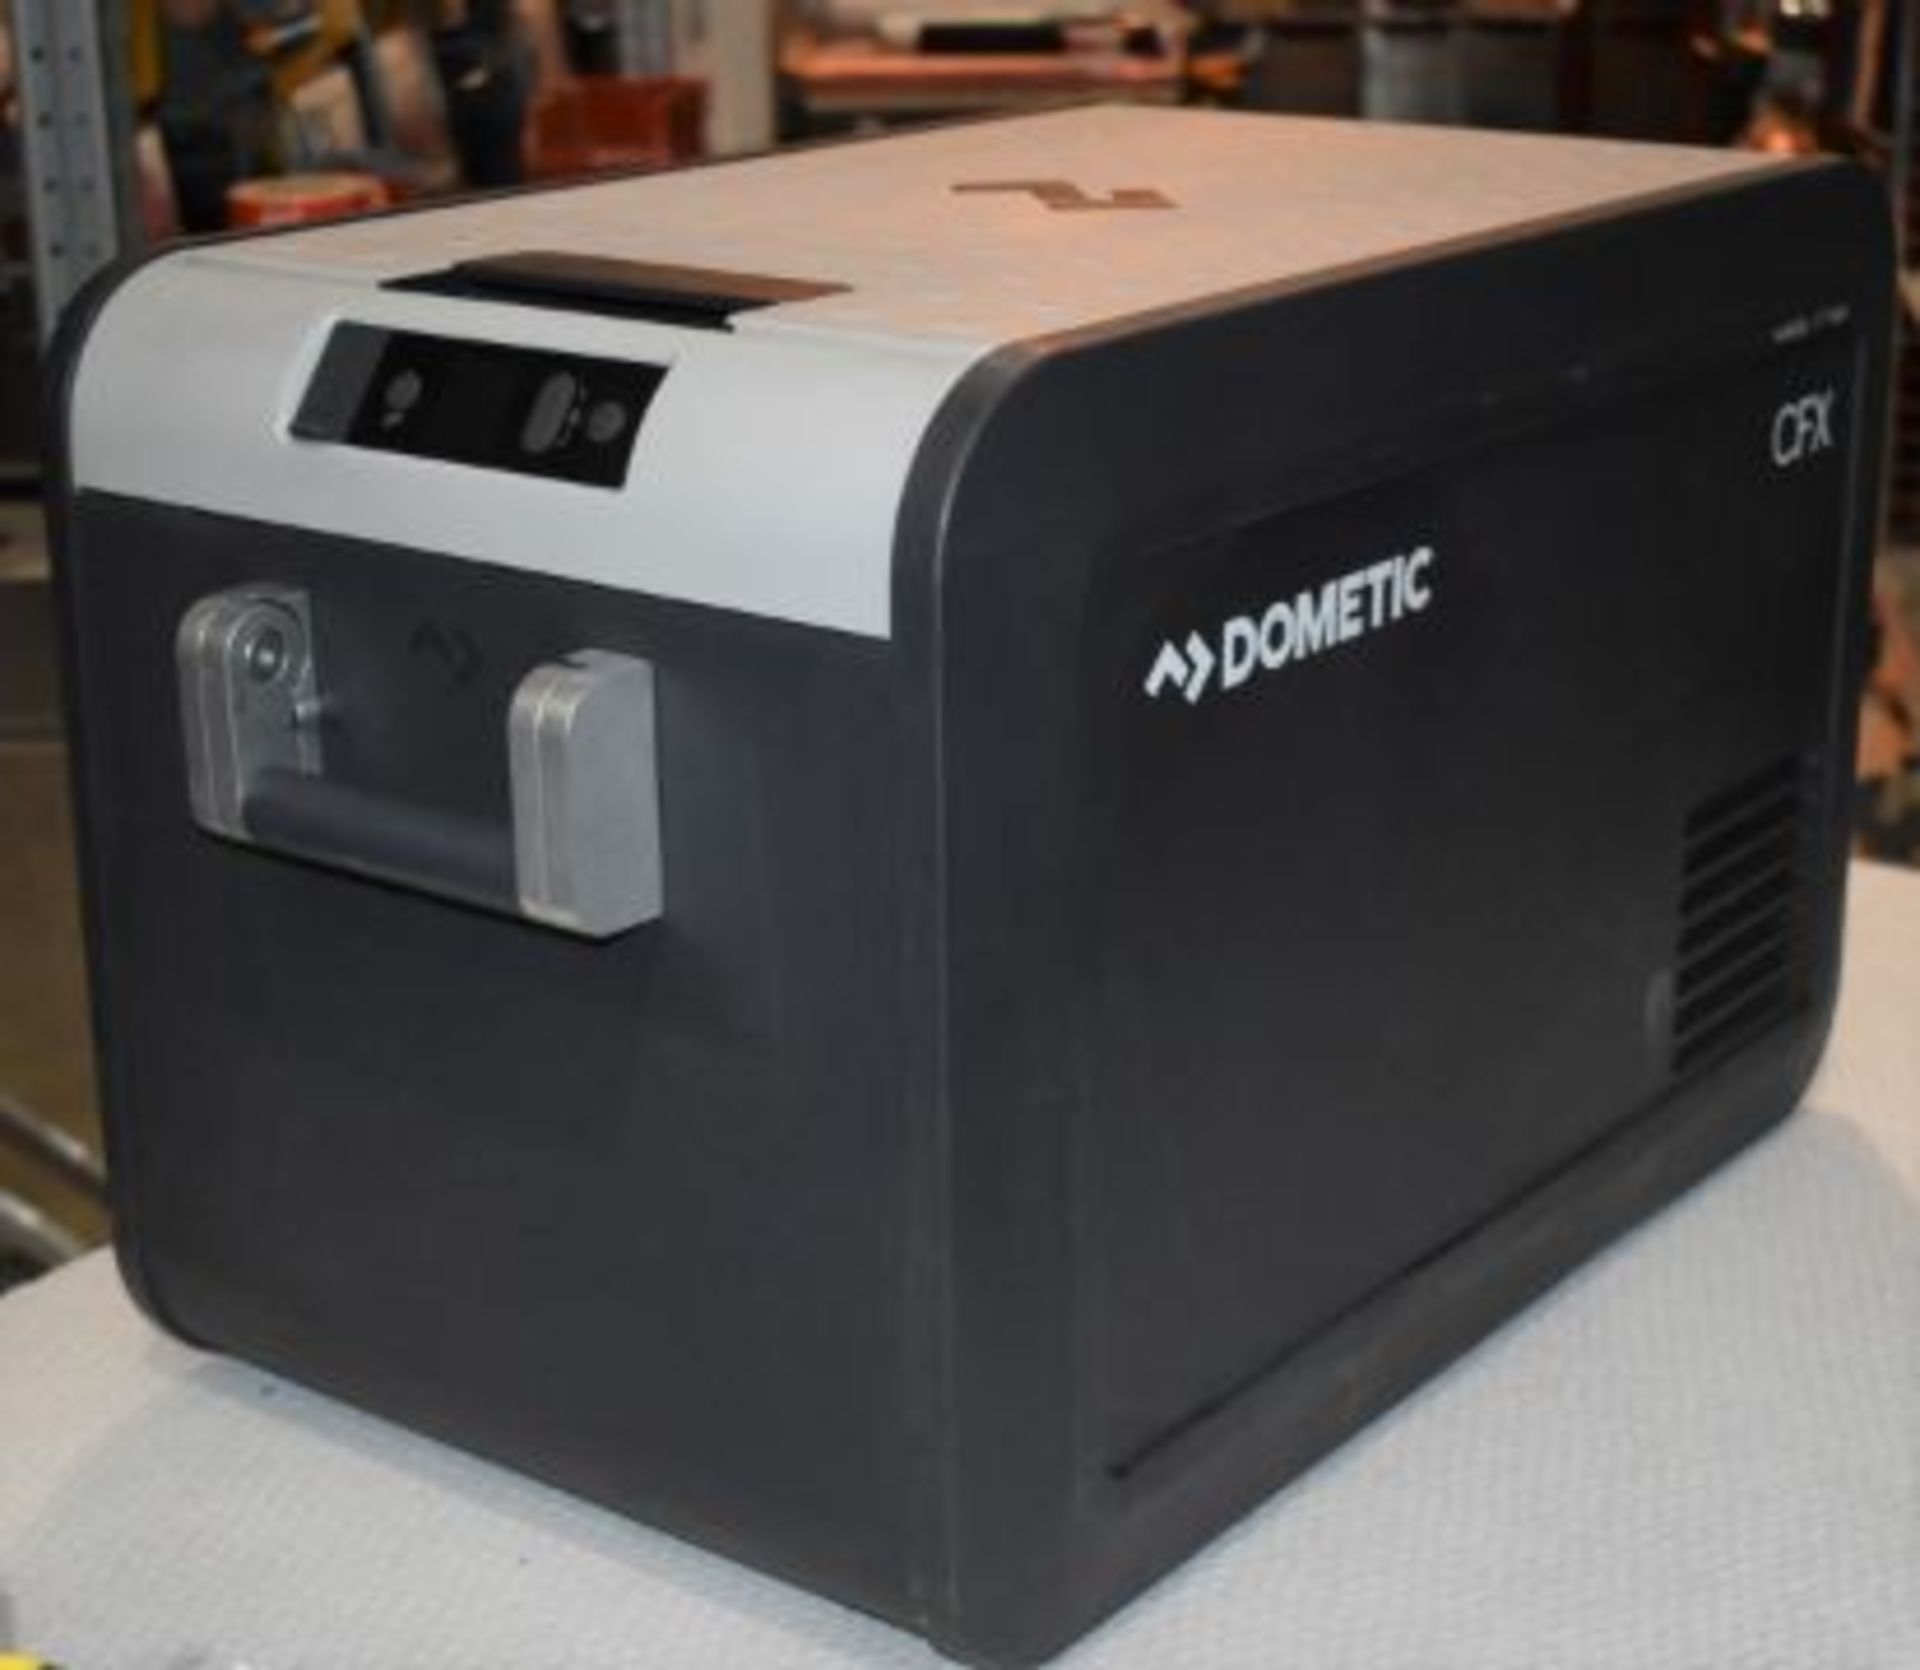 1 x Dometic CFX3 35 Portable Compressor Cooler / Freezer - For Camping, Motorhomes, Parties RRP £916 - Image 7 of 9